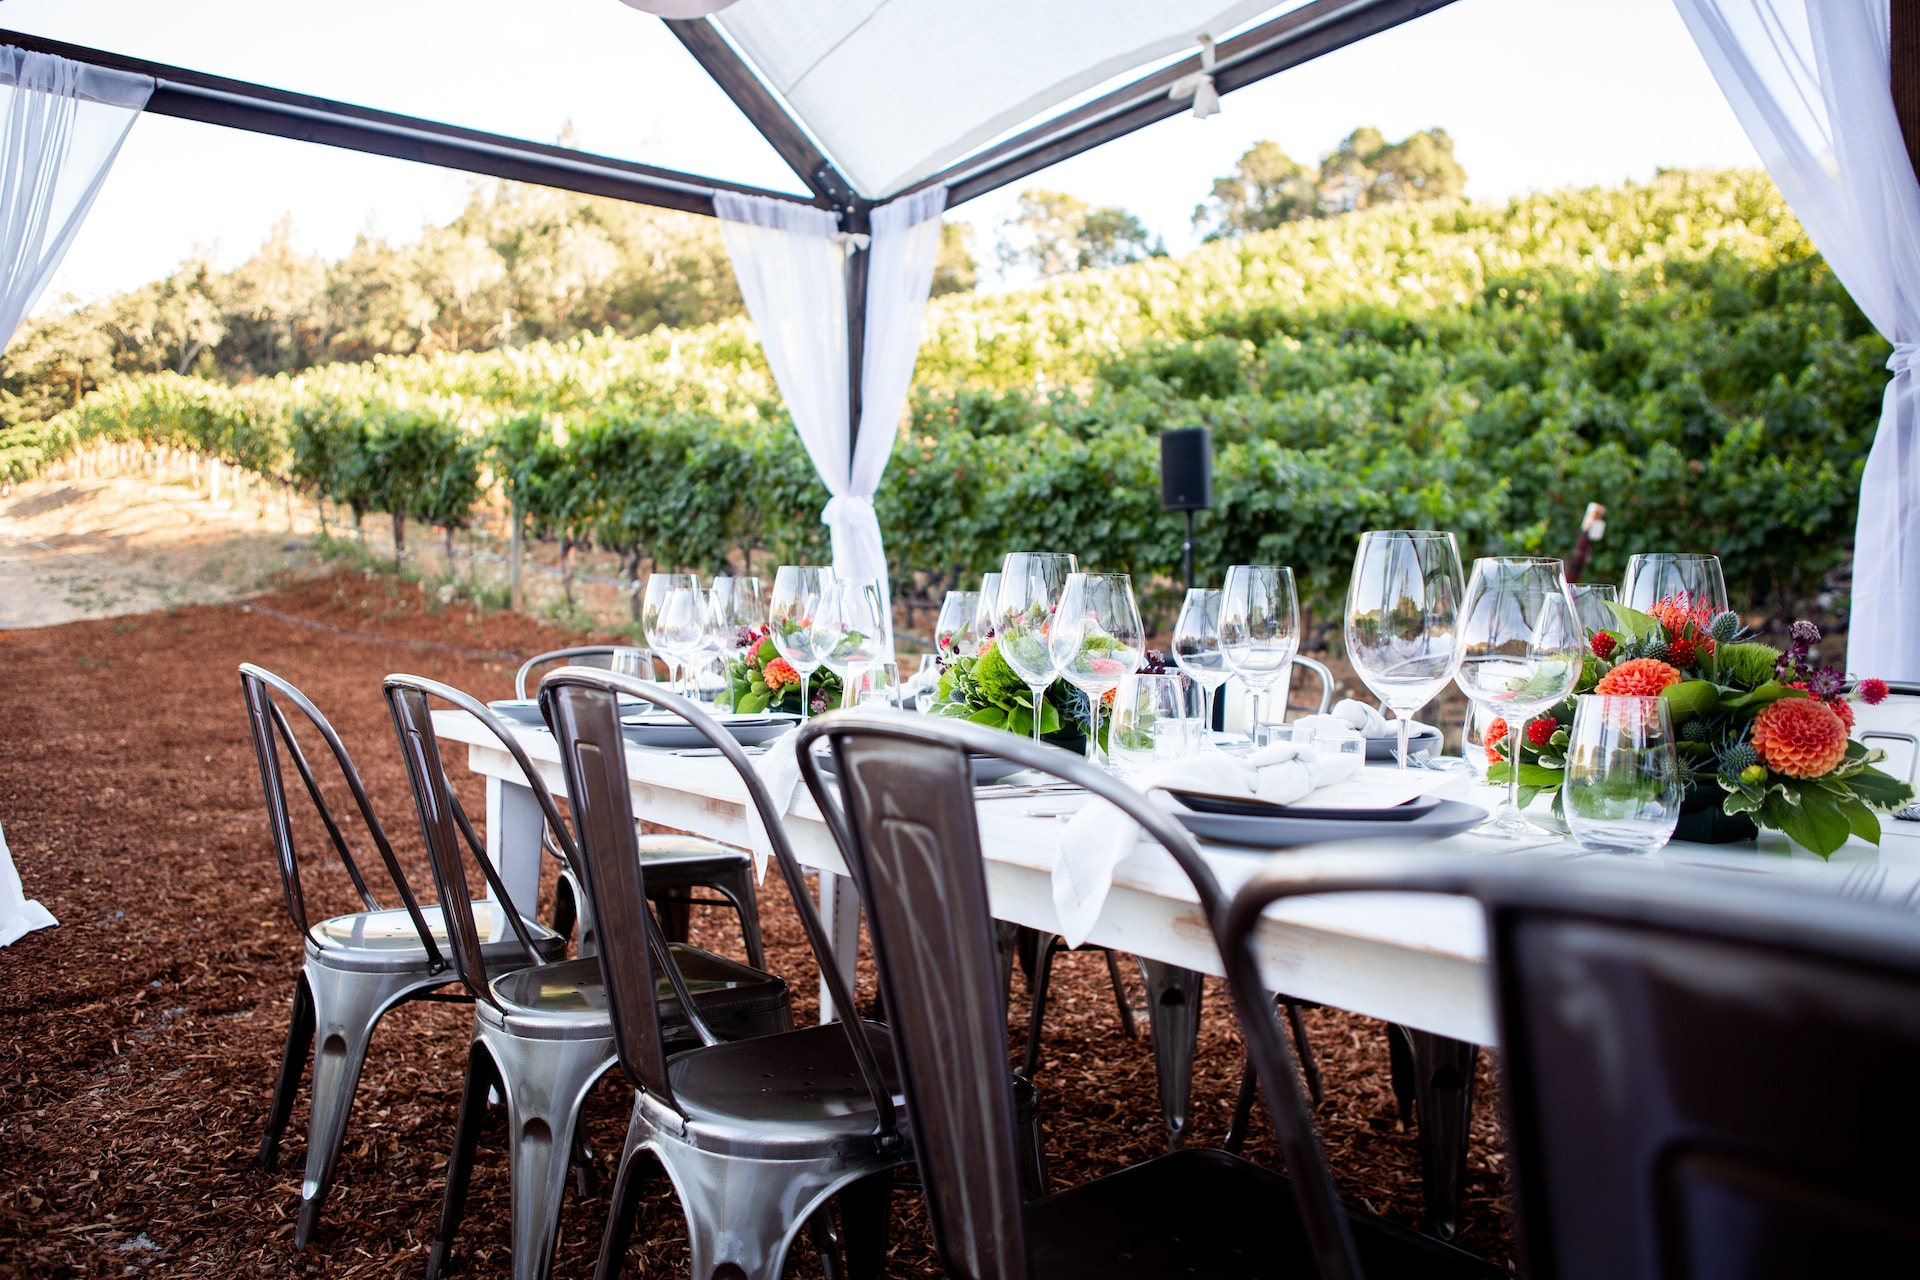 An outdoor table filled with formal trappings and wine glasses near a vineyard.